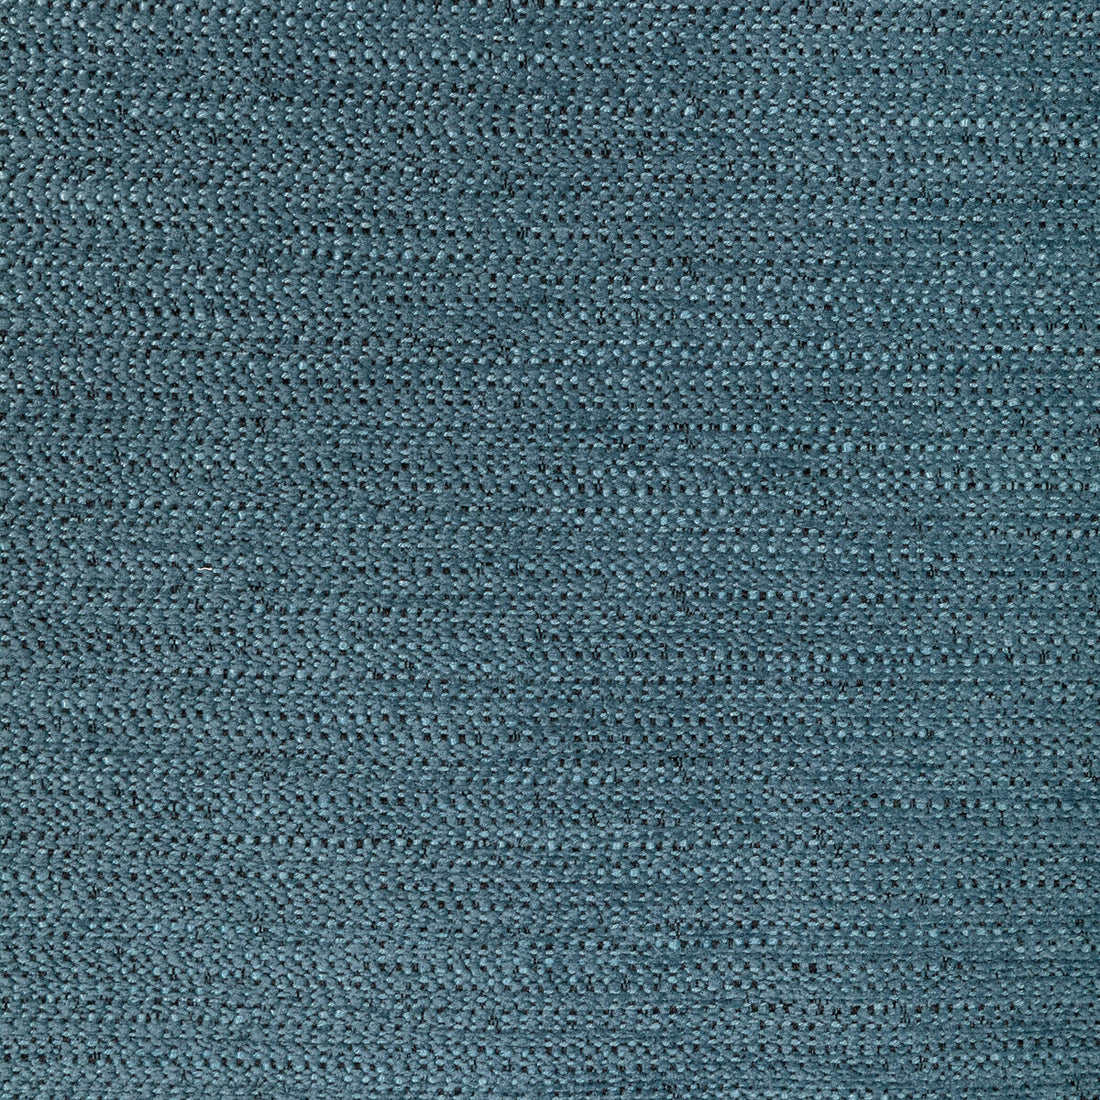 Recoup fabric in storm color - pattern 36569.505.0 - by Kravet Contract in the Seaqual collection